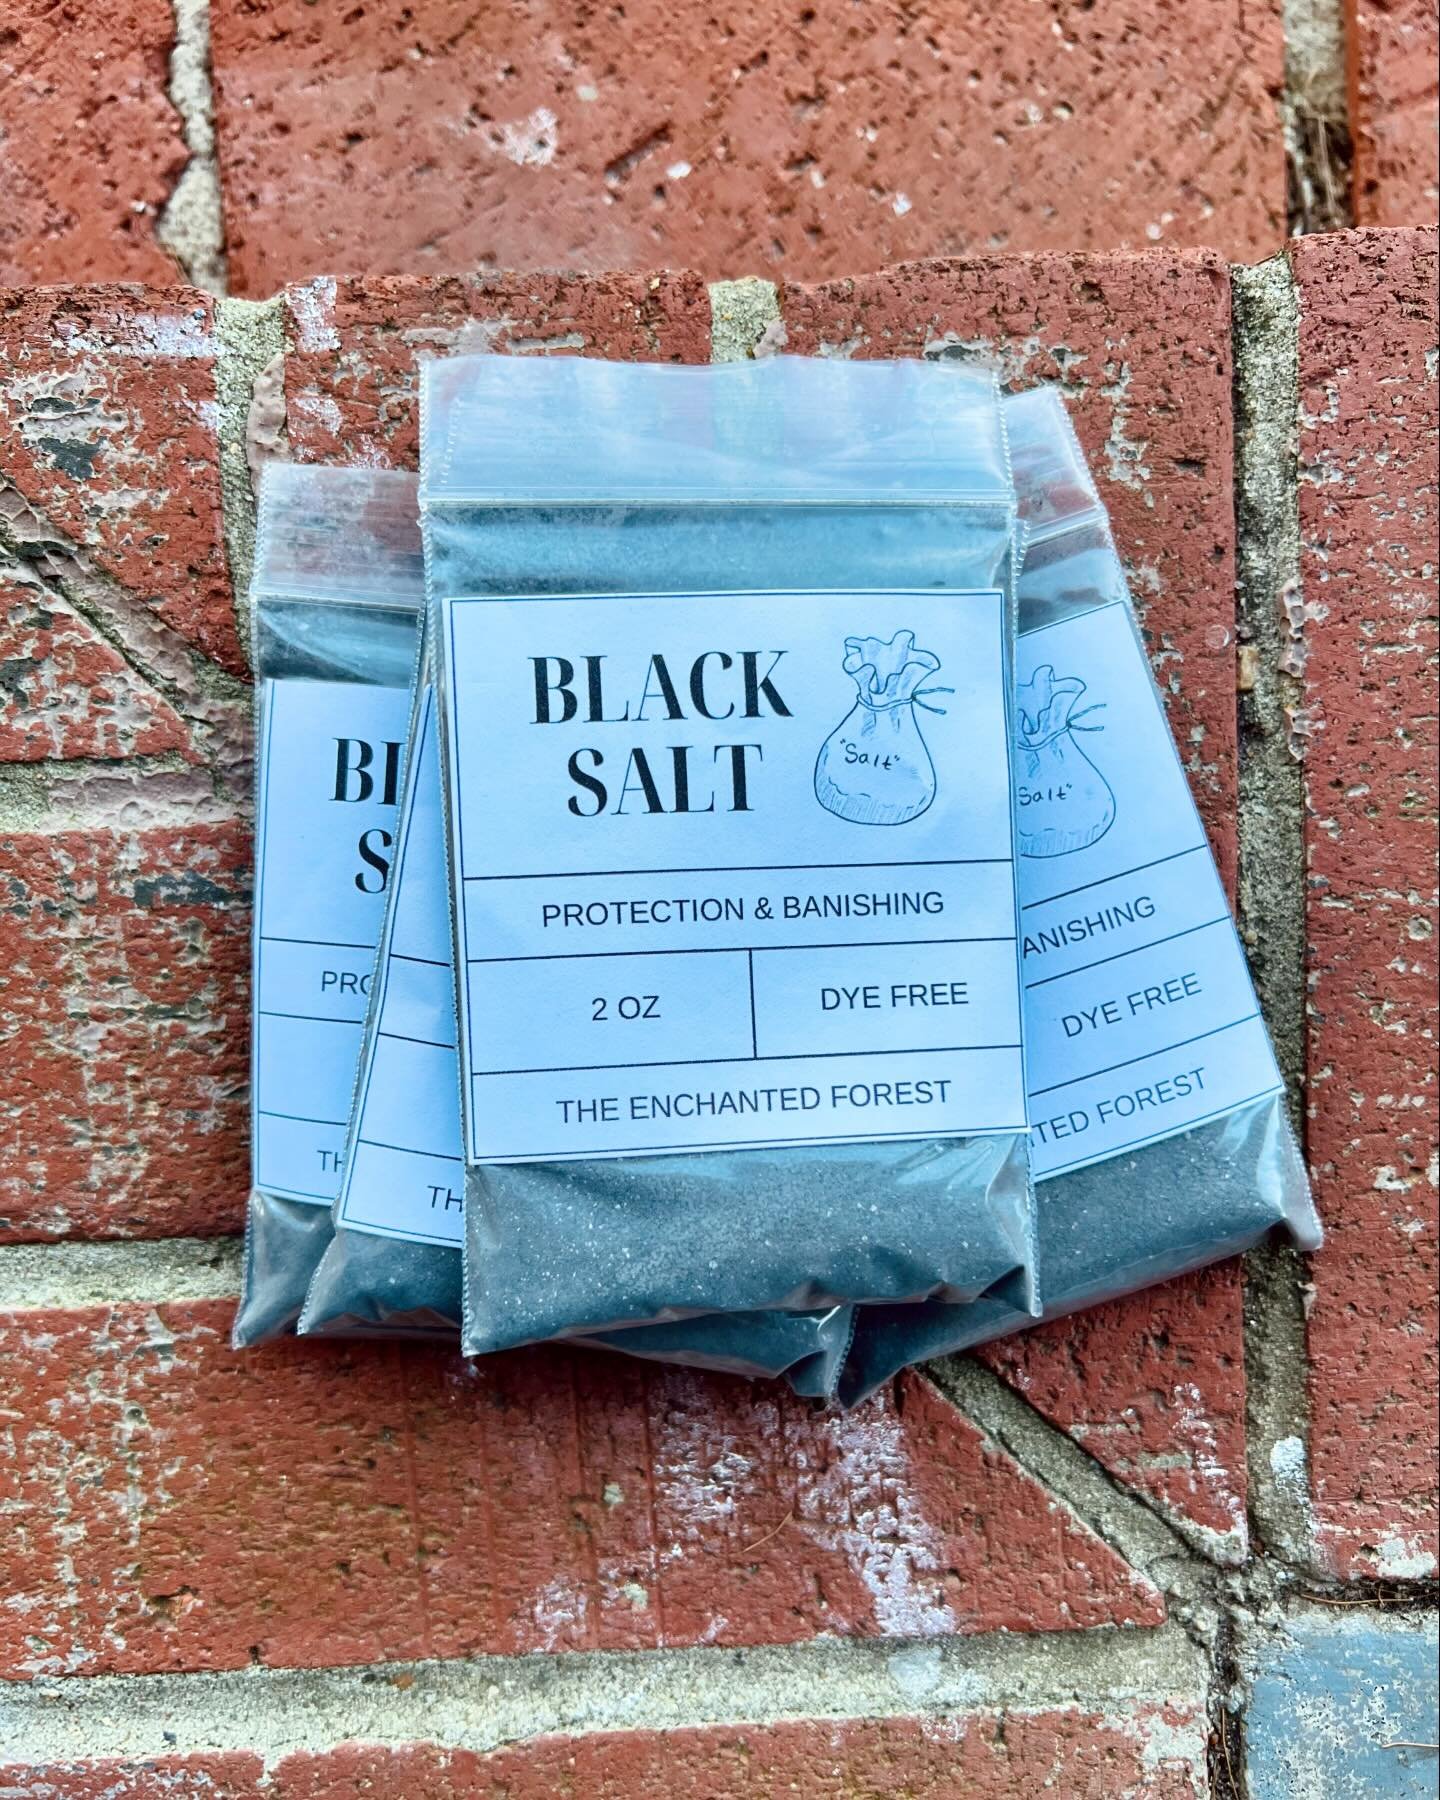 &ldquo;Protected, guarded, and warded&rdquo; is my mantra anytime the energy feels off. It&rsquo;s my reminder that magic is there keeping me safe.

Black salt is a tool in many protection and banishing spells. It&rsquo;s as simple as it is versatile